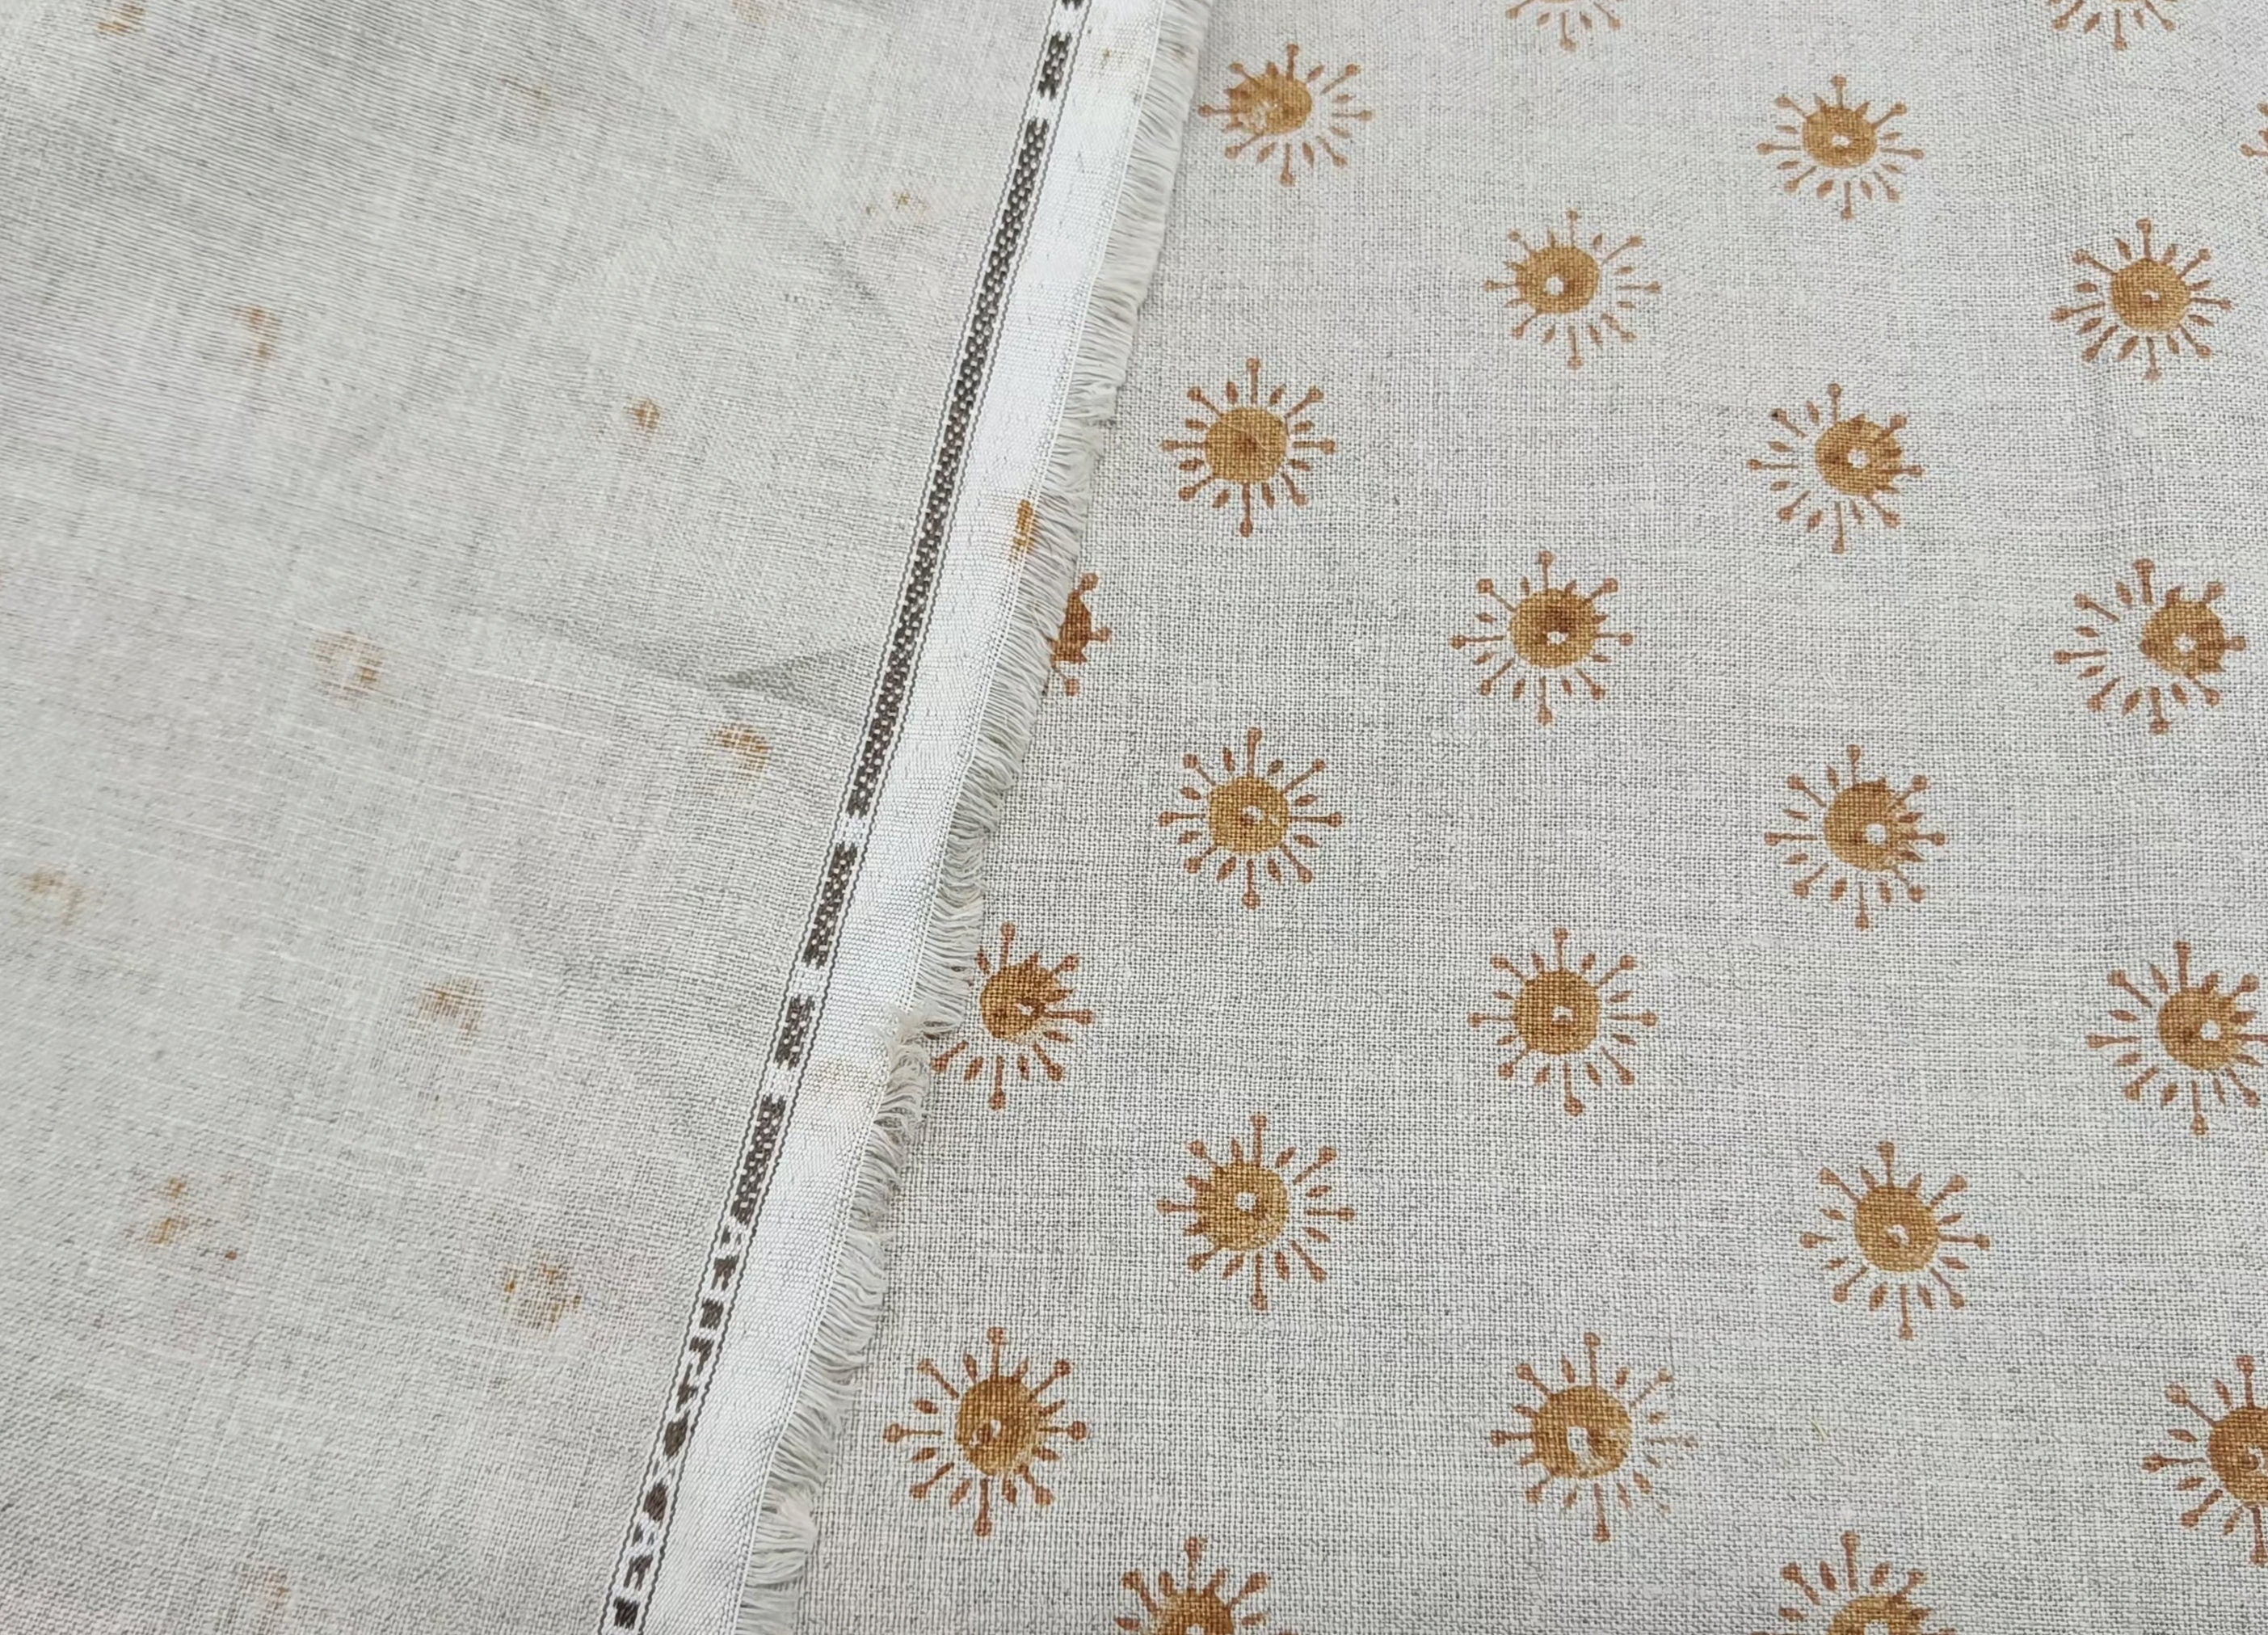 Happy Bloom  Hand Block Print Pure Linen Fabric  Upholstery Fabric By The Yard  Handmade Floral Block Print